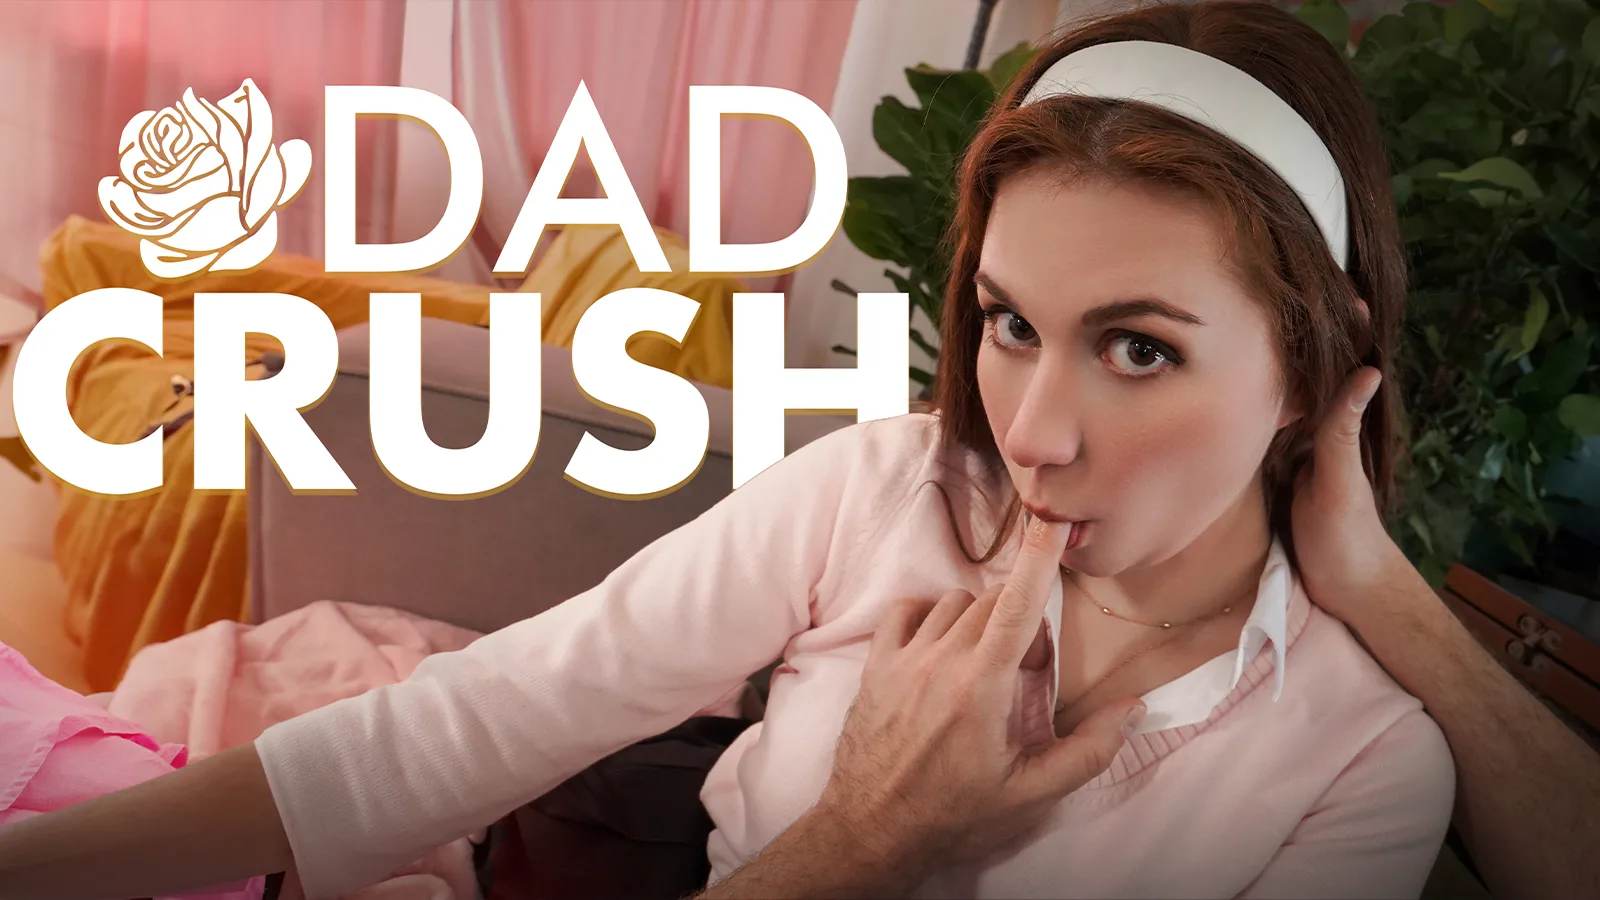 A-Dick-Ted to You - Dadcrush